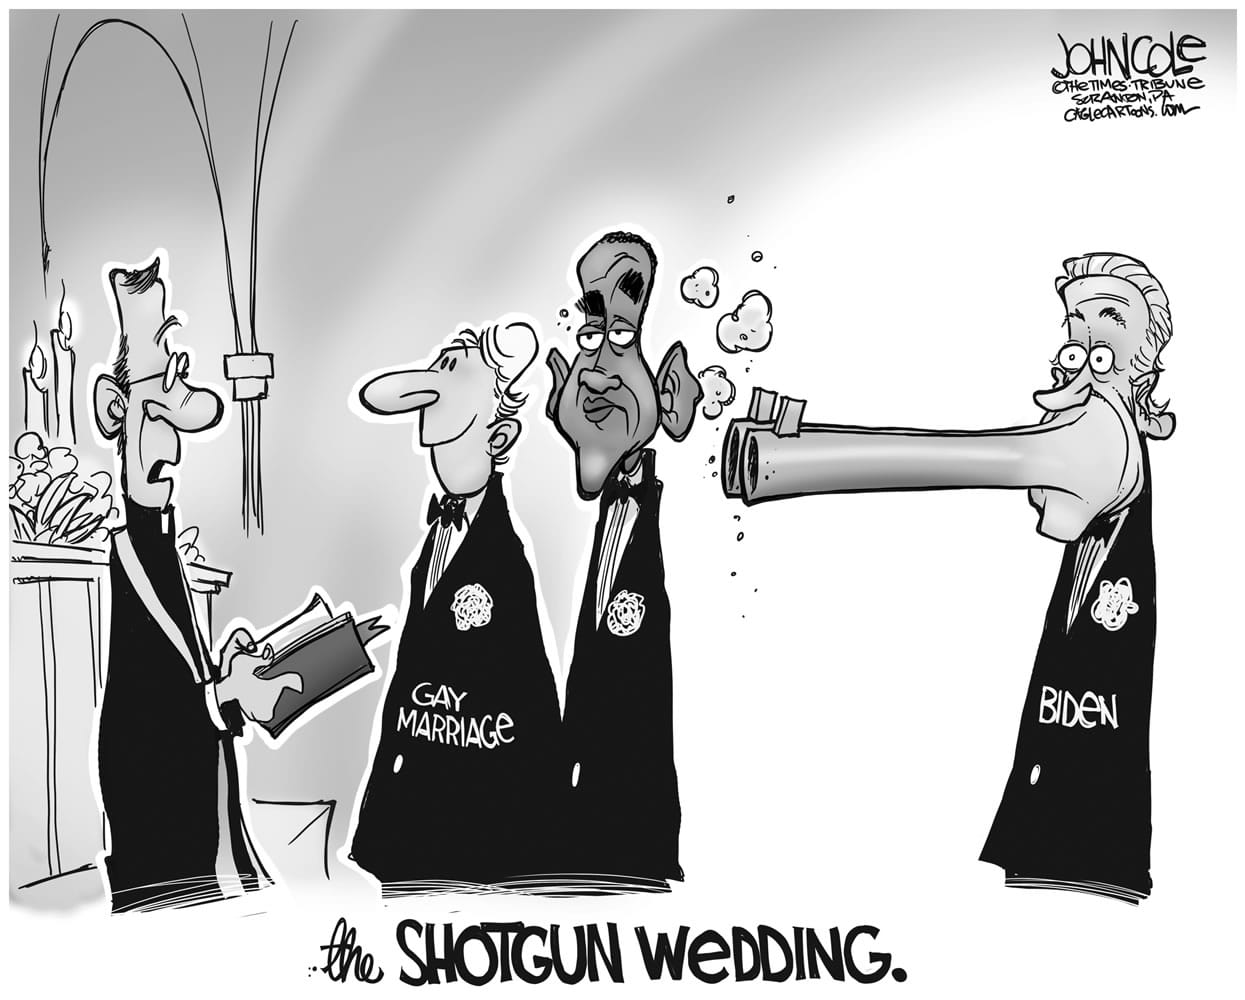 Other opinions cartoon: Obama's gay marriage growth